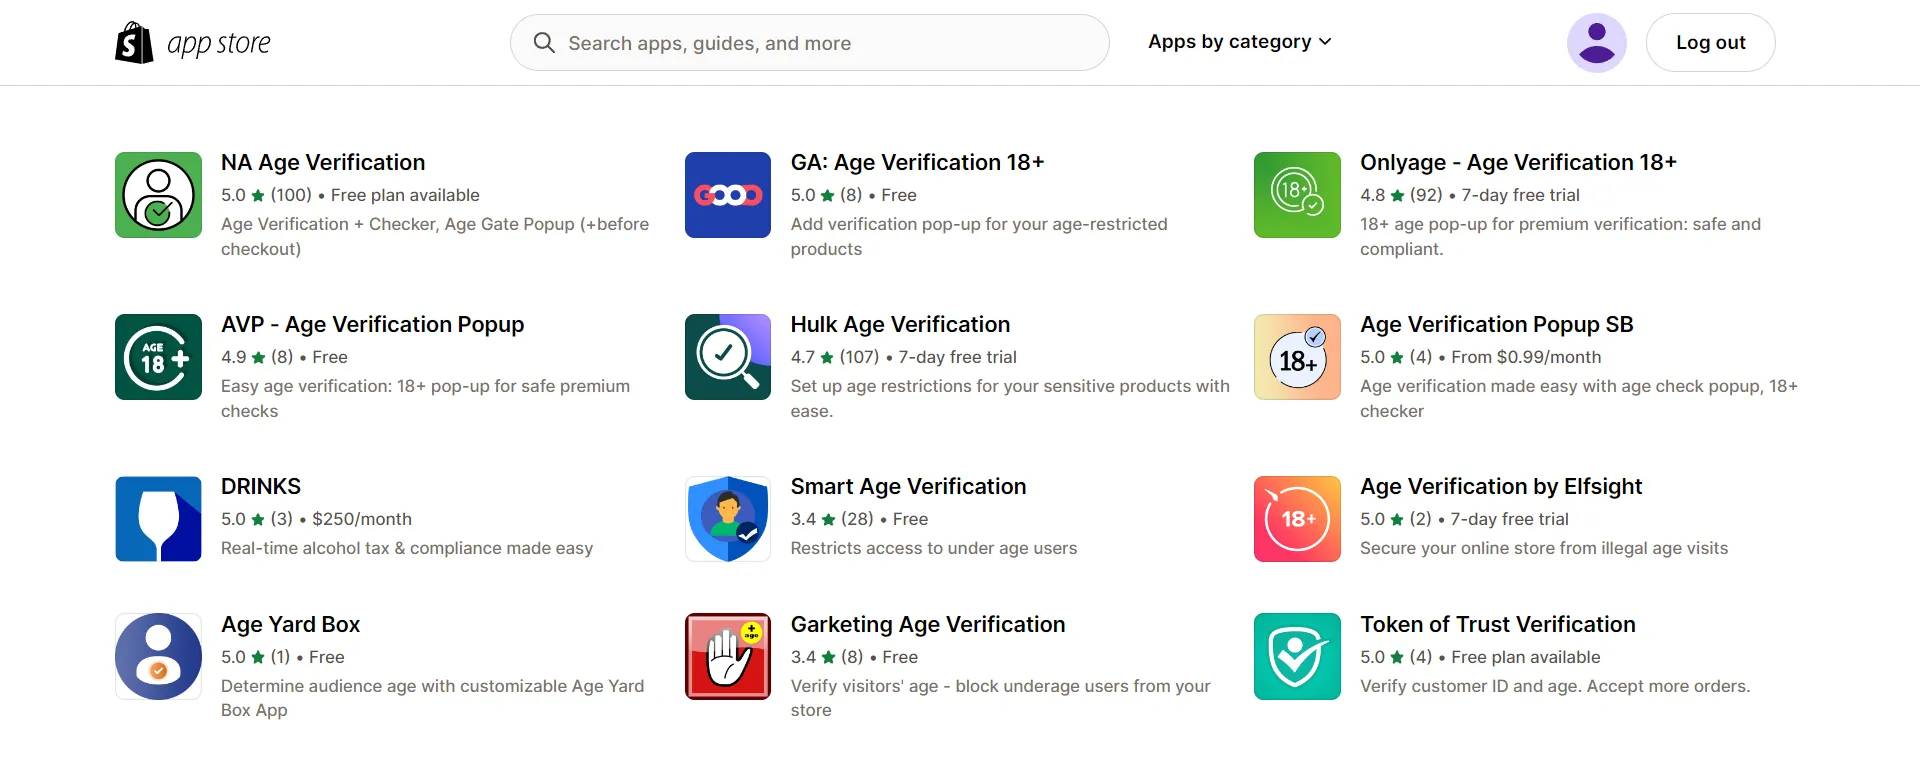 The best age verification apps for Shopify